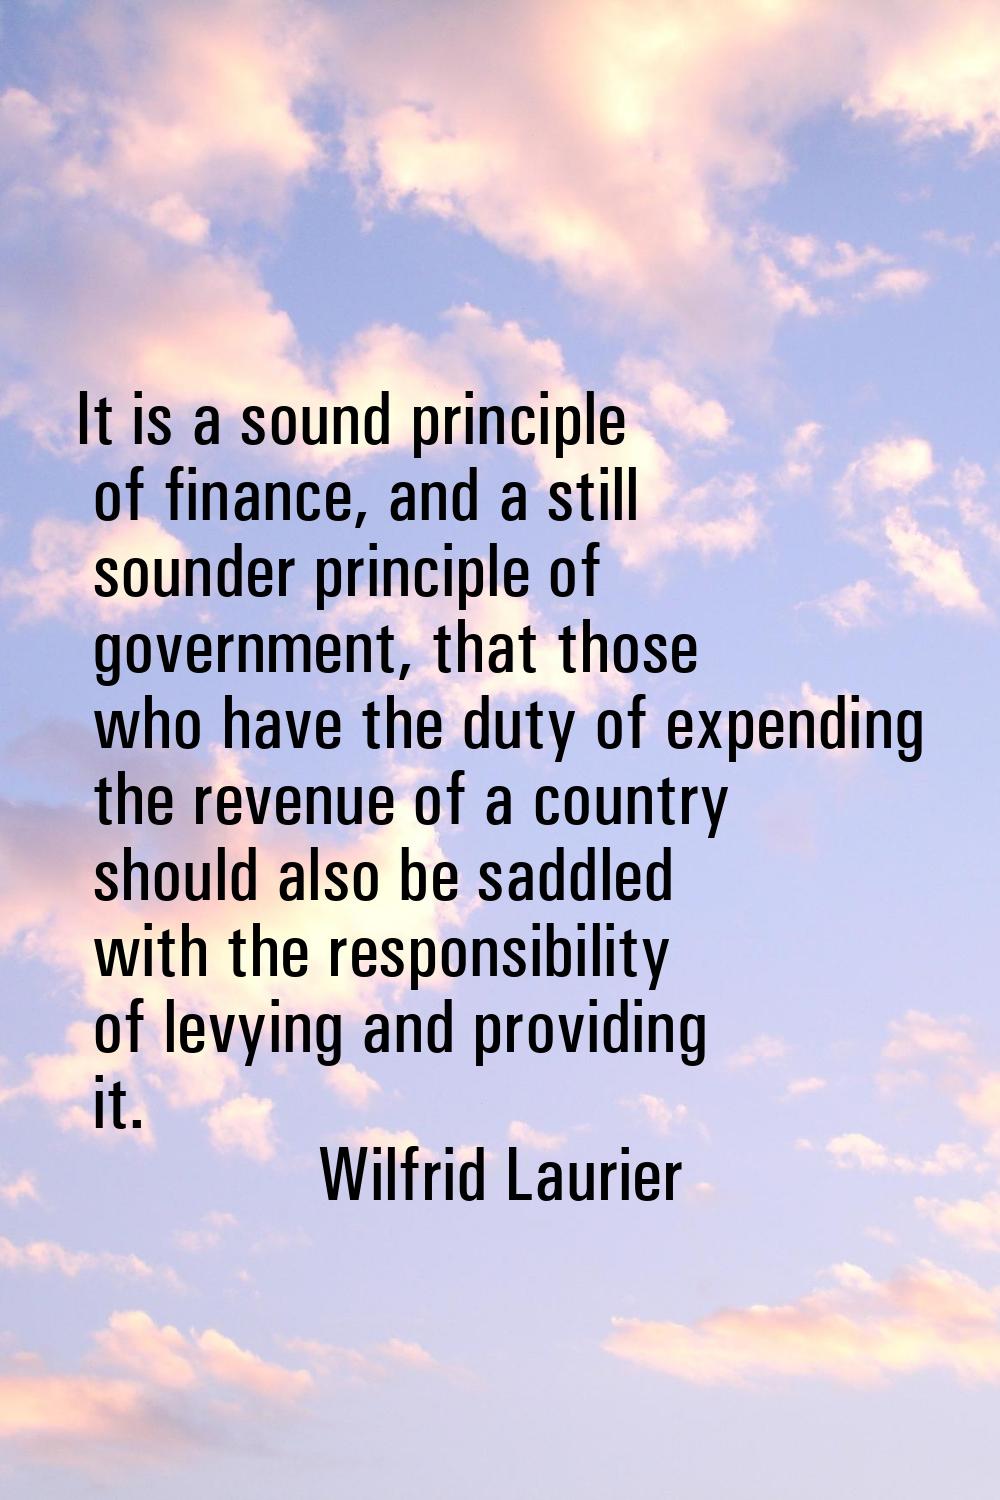 It is a sound principle of finance, and a still sounder principle of government, that those who hav